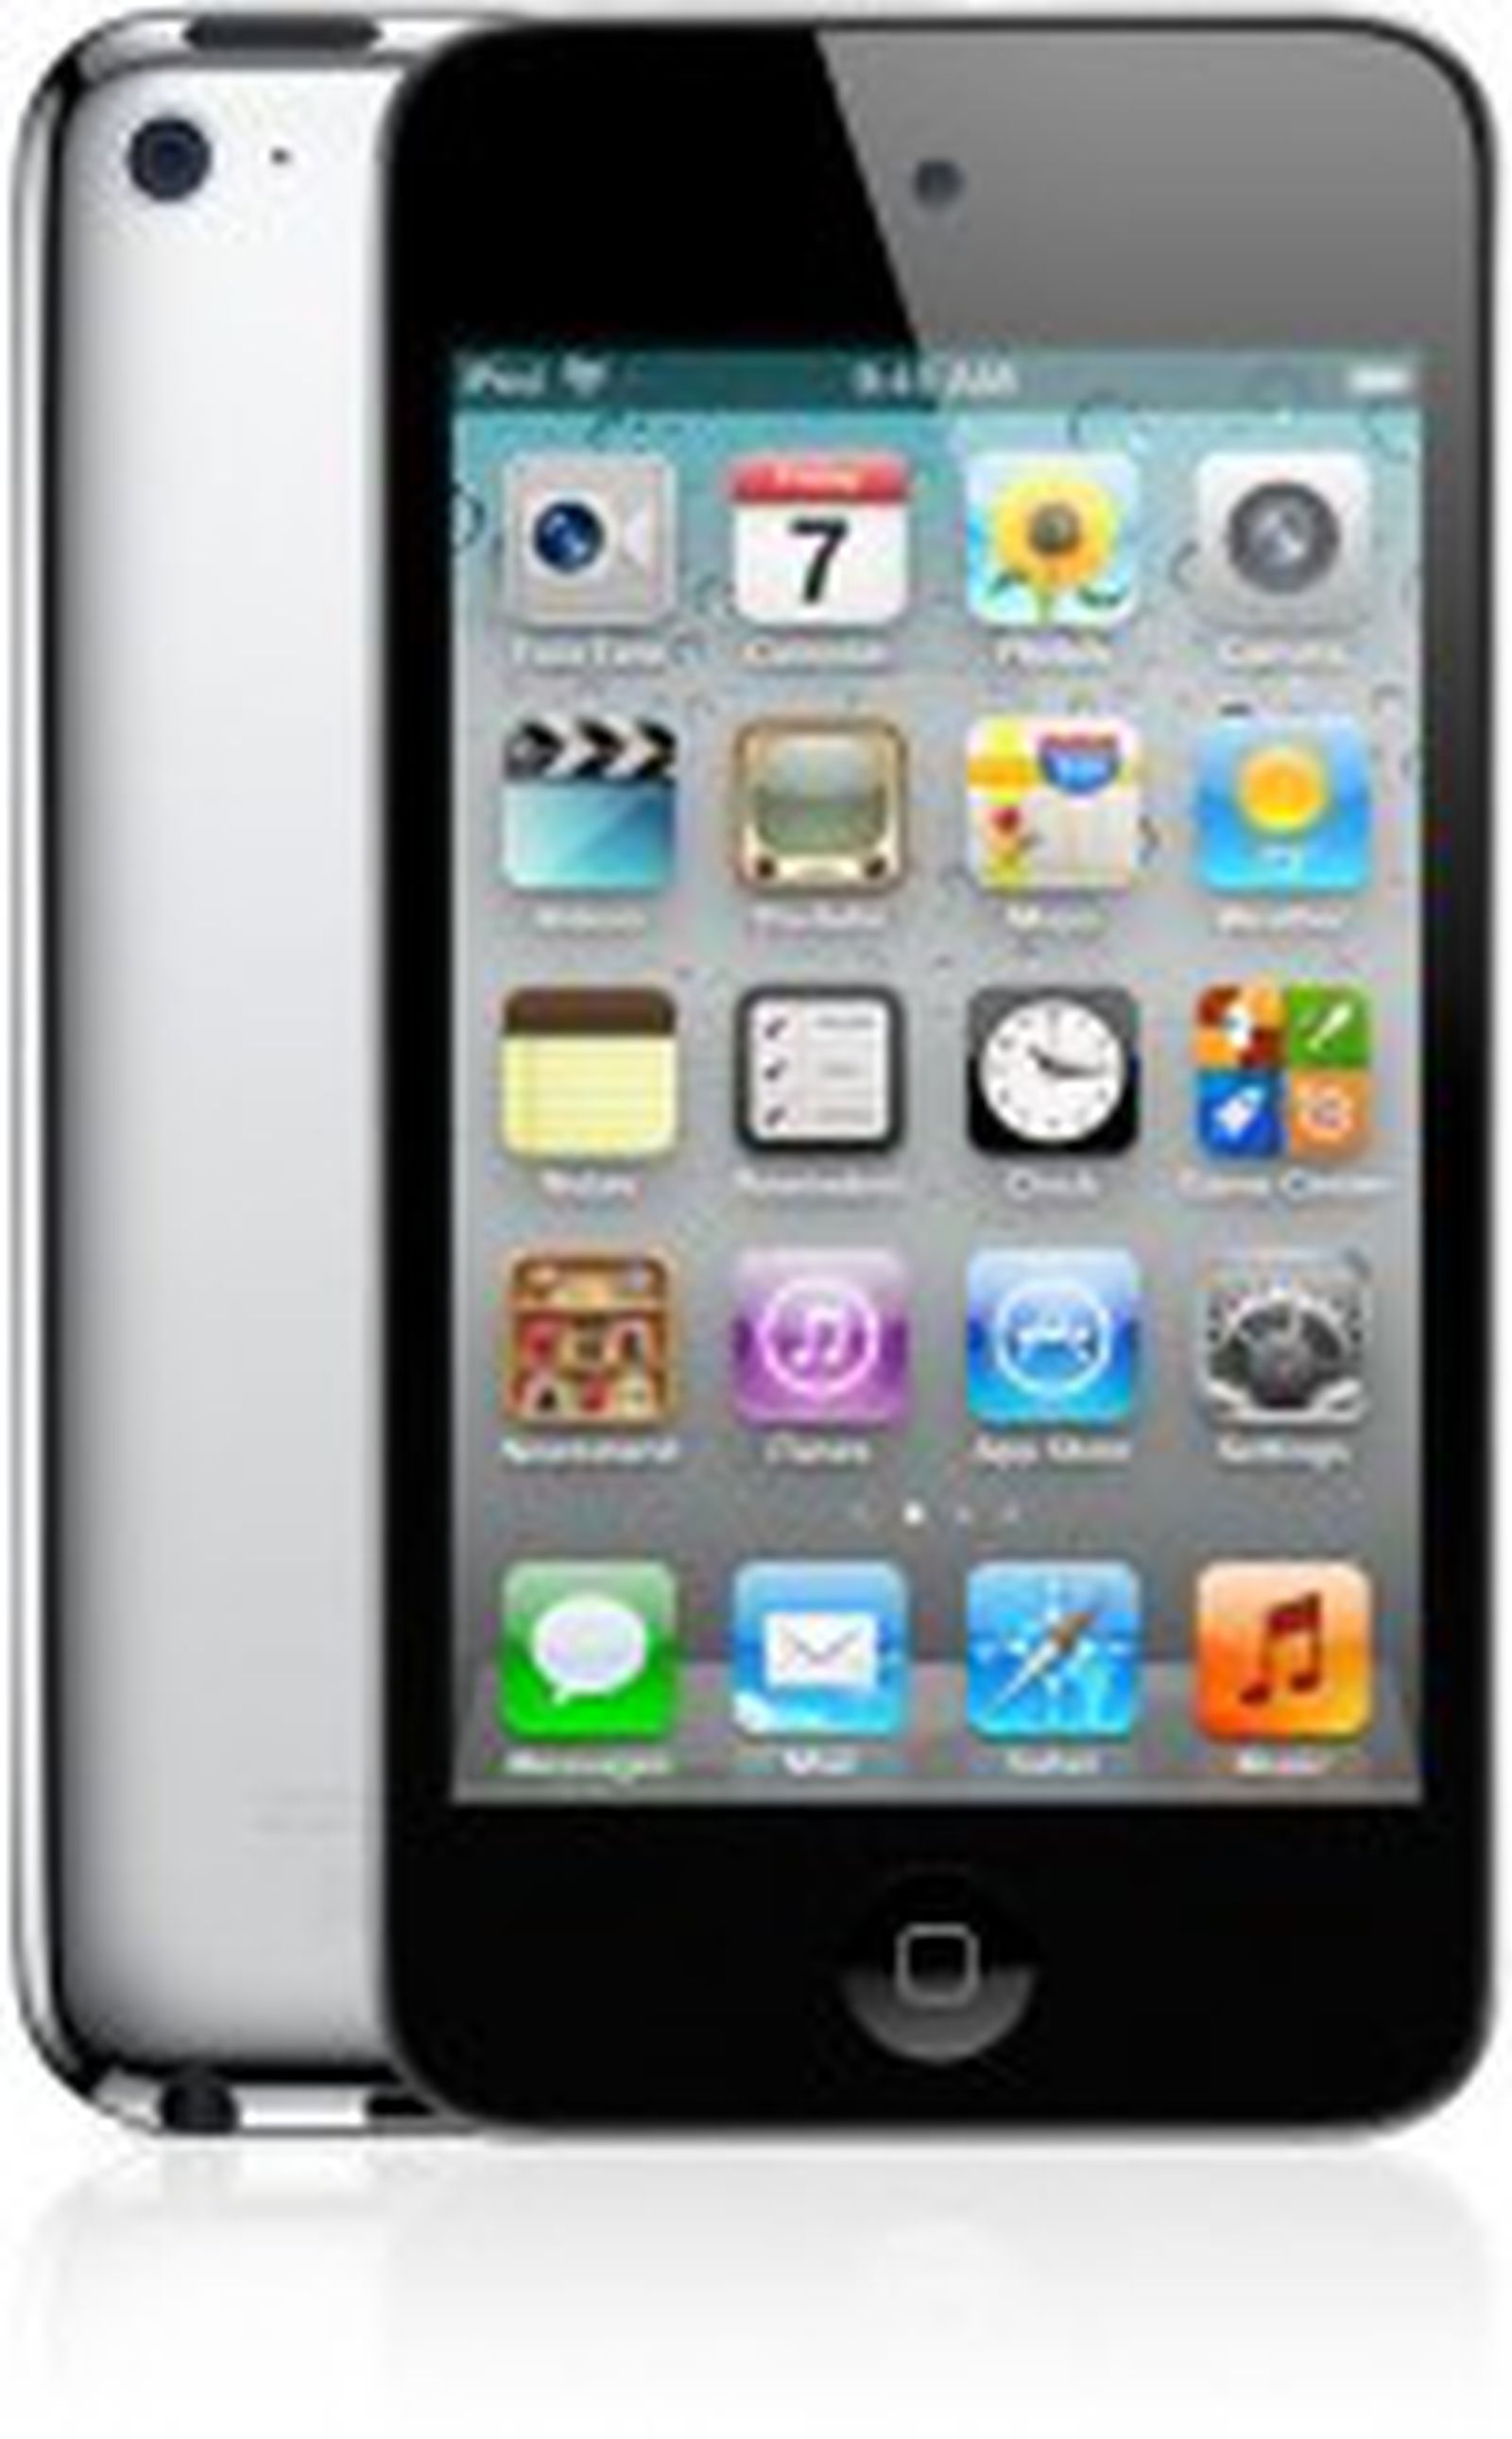 Ever' for iPod Touch to Bring New Colors, GPS, Camera Improvements? -